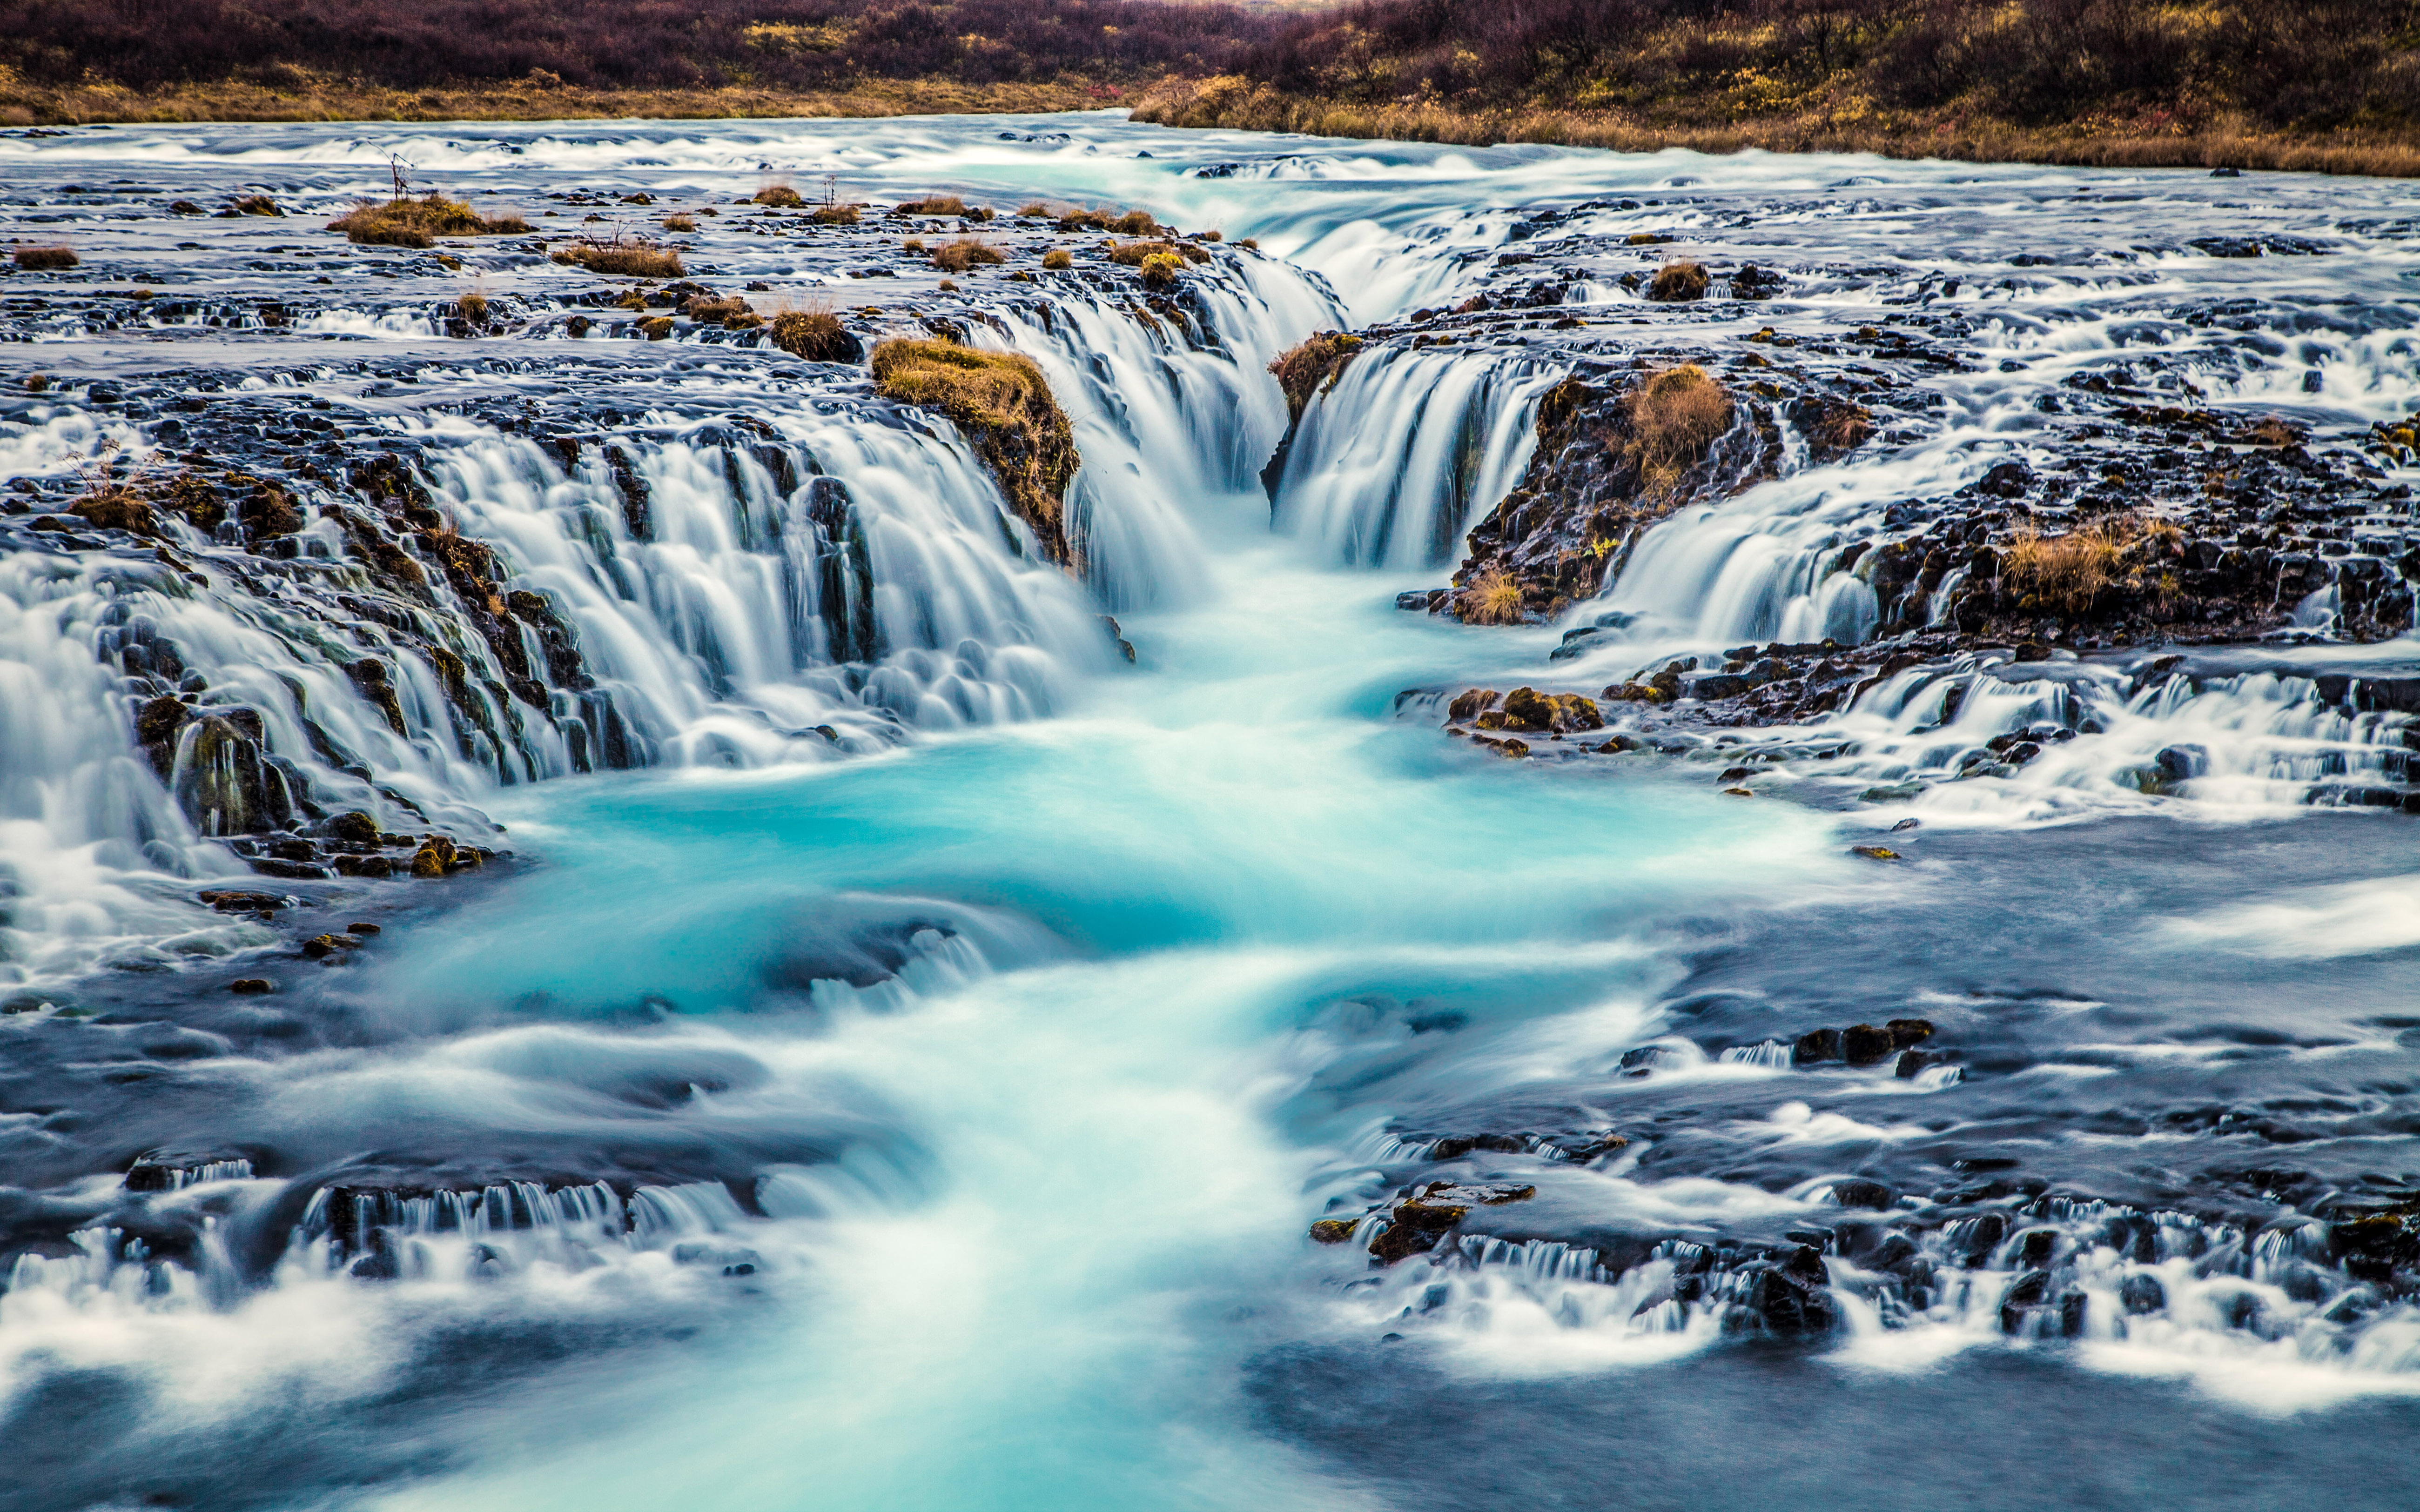 Bruarfoss Waterfall Turquoise Blue Water In Iceland Nature Landscape 4k 